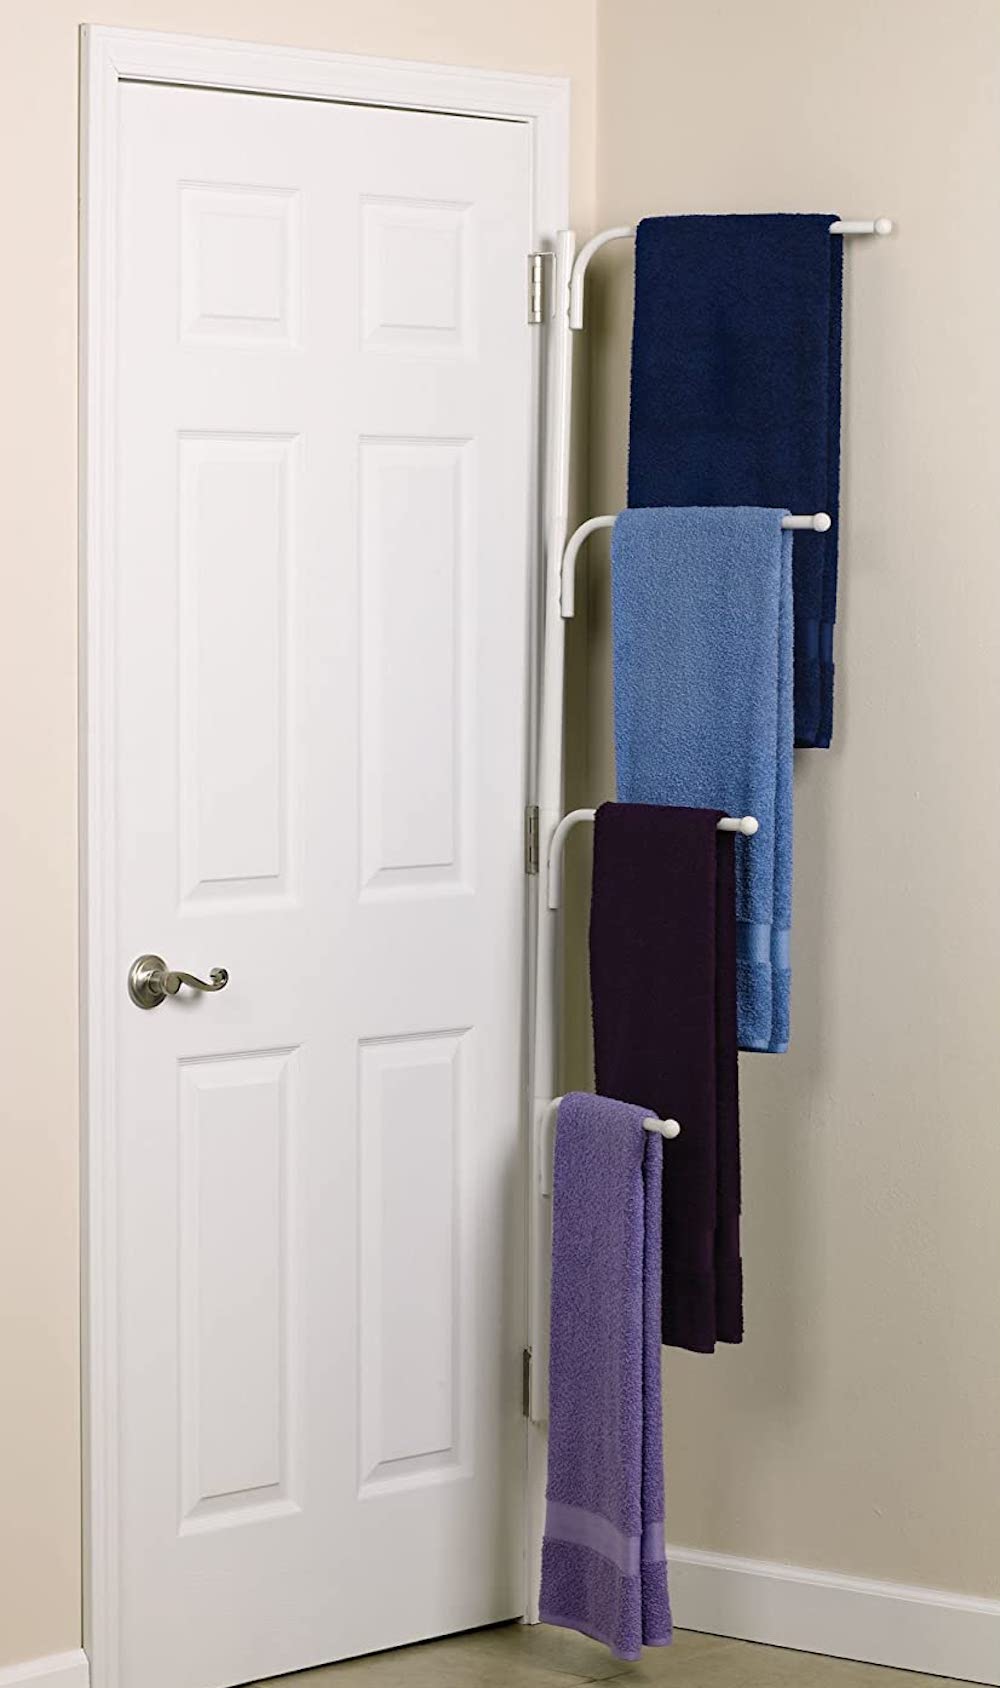 Household Essentials Hinge It Clutter Buster Hanging Valet family towel rack with 4 parallel bars attached to the side of a bathroom door